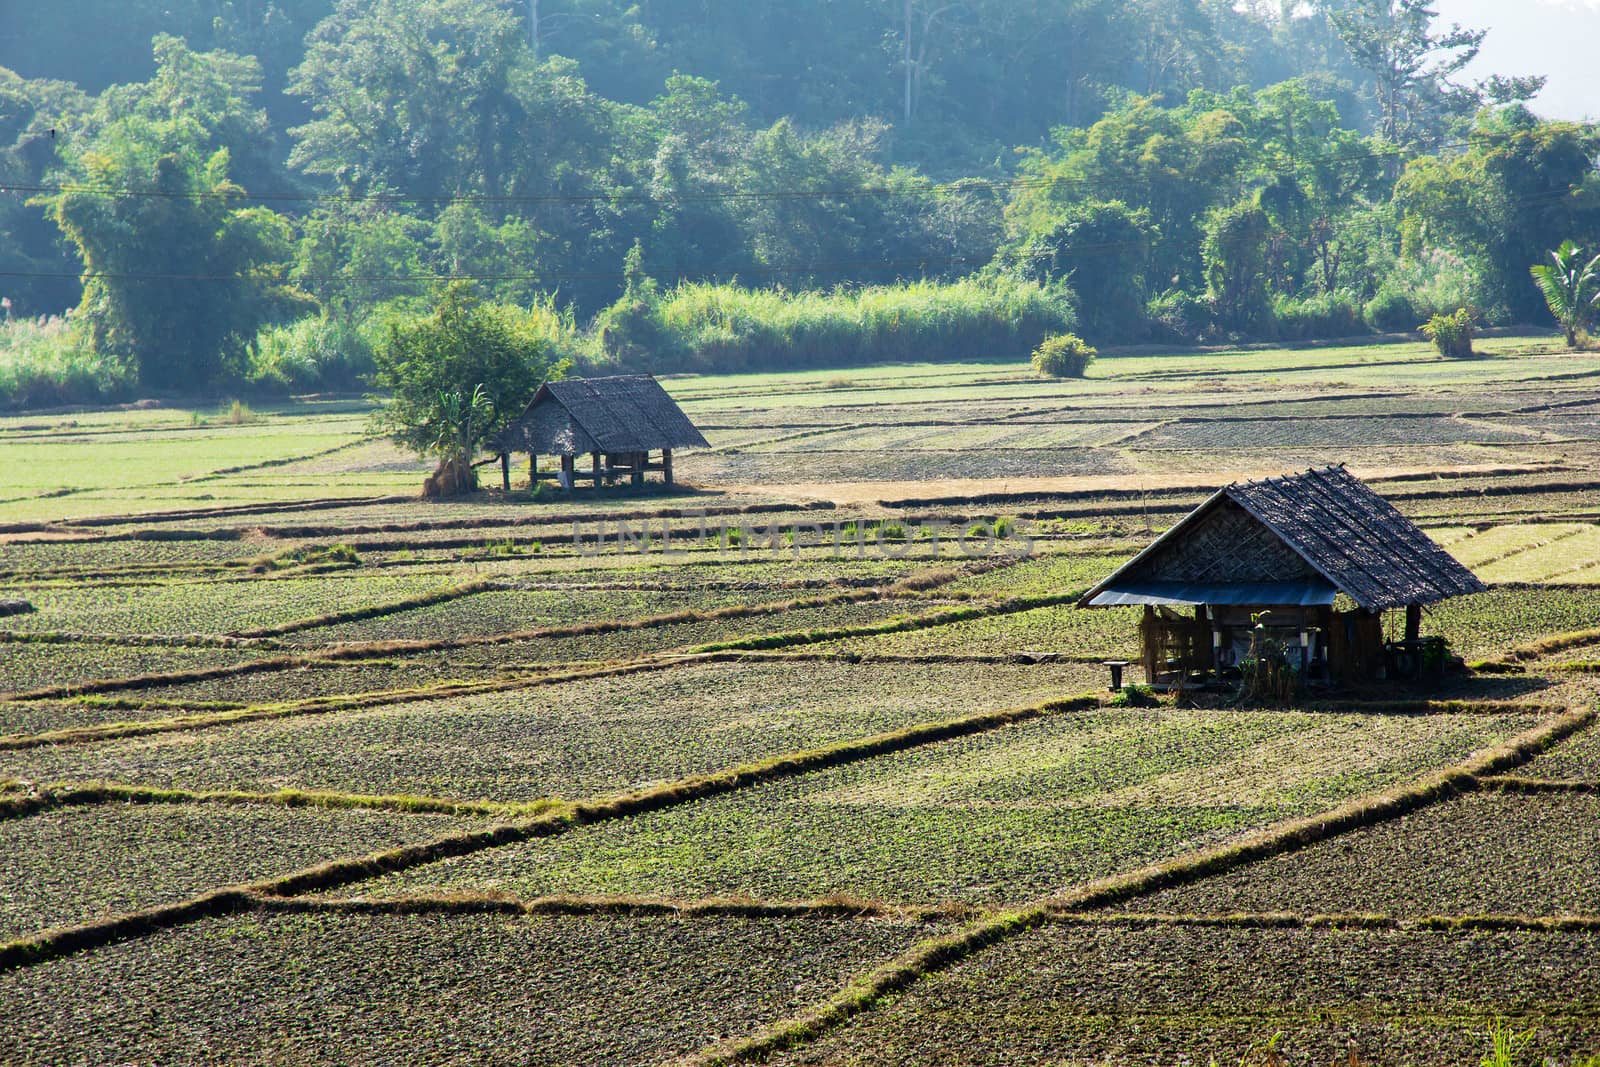 Paddy field in countryside,thailand